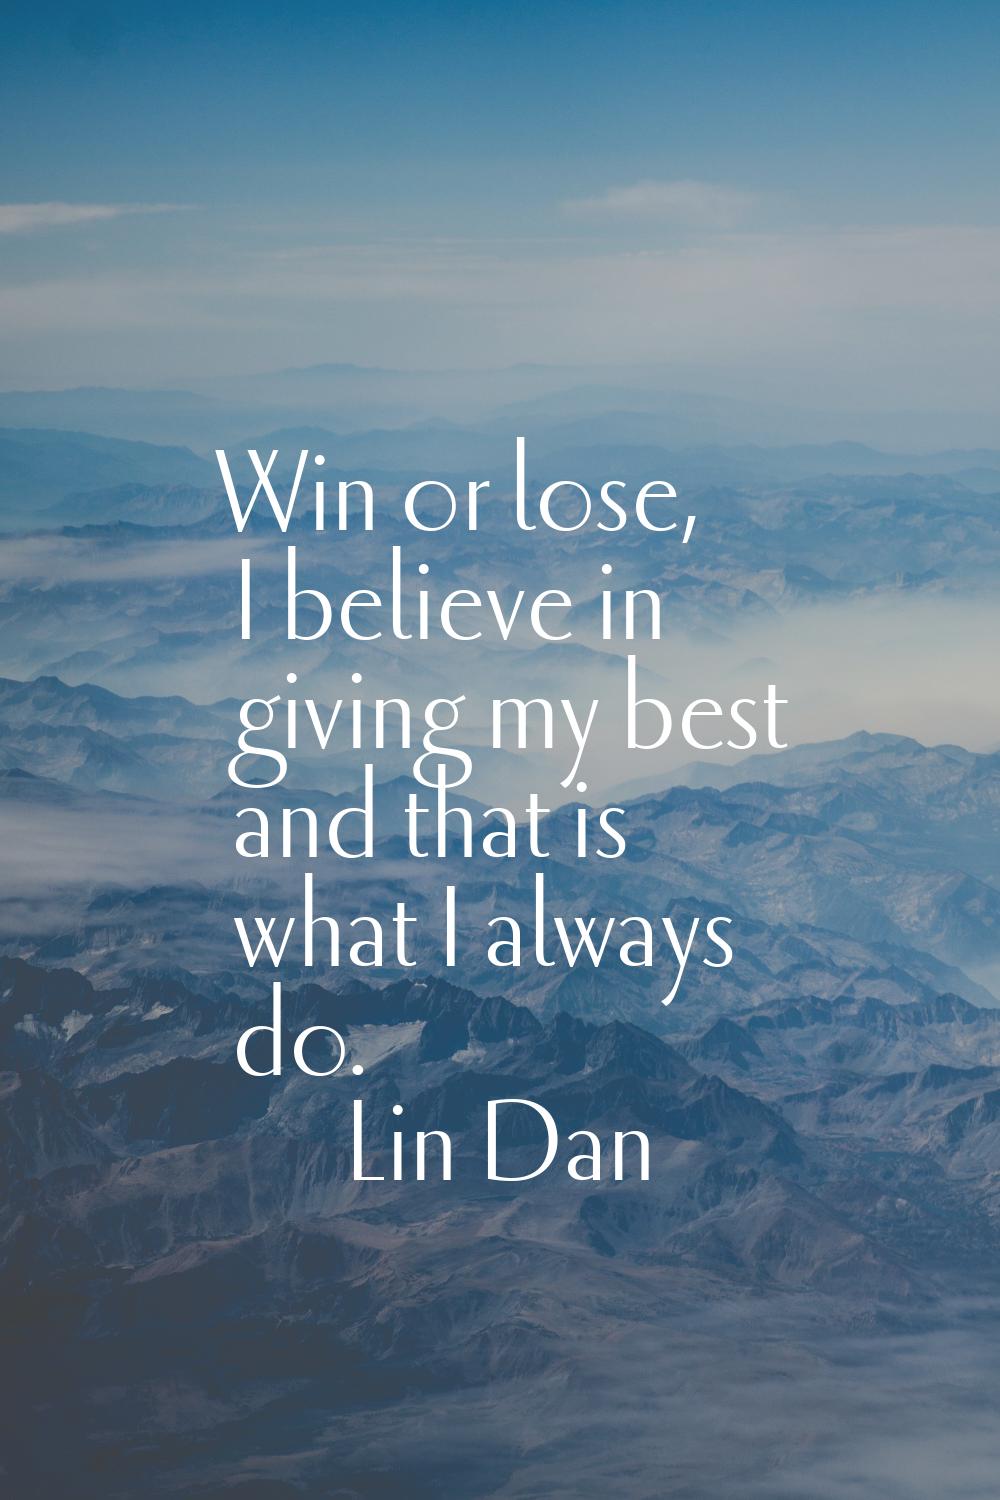 Win or lose, I believe in giving my best and that is what I always do.